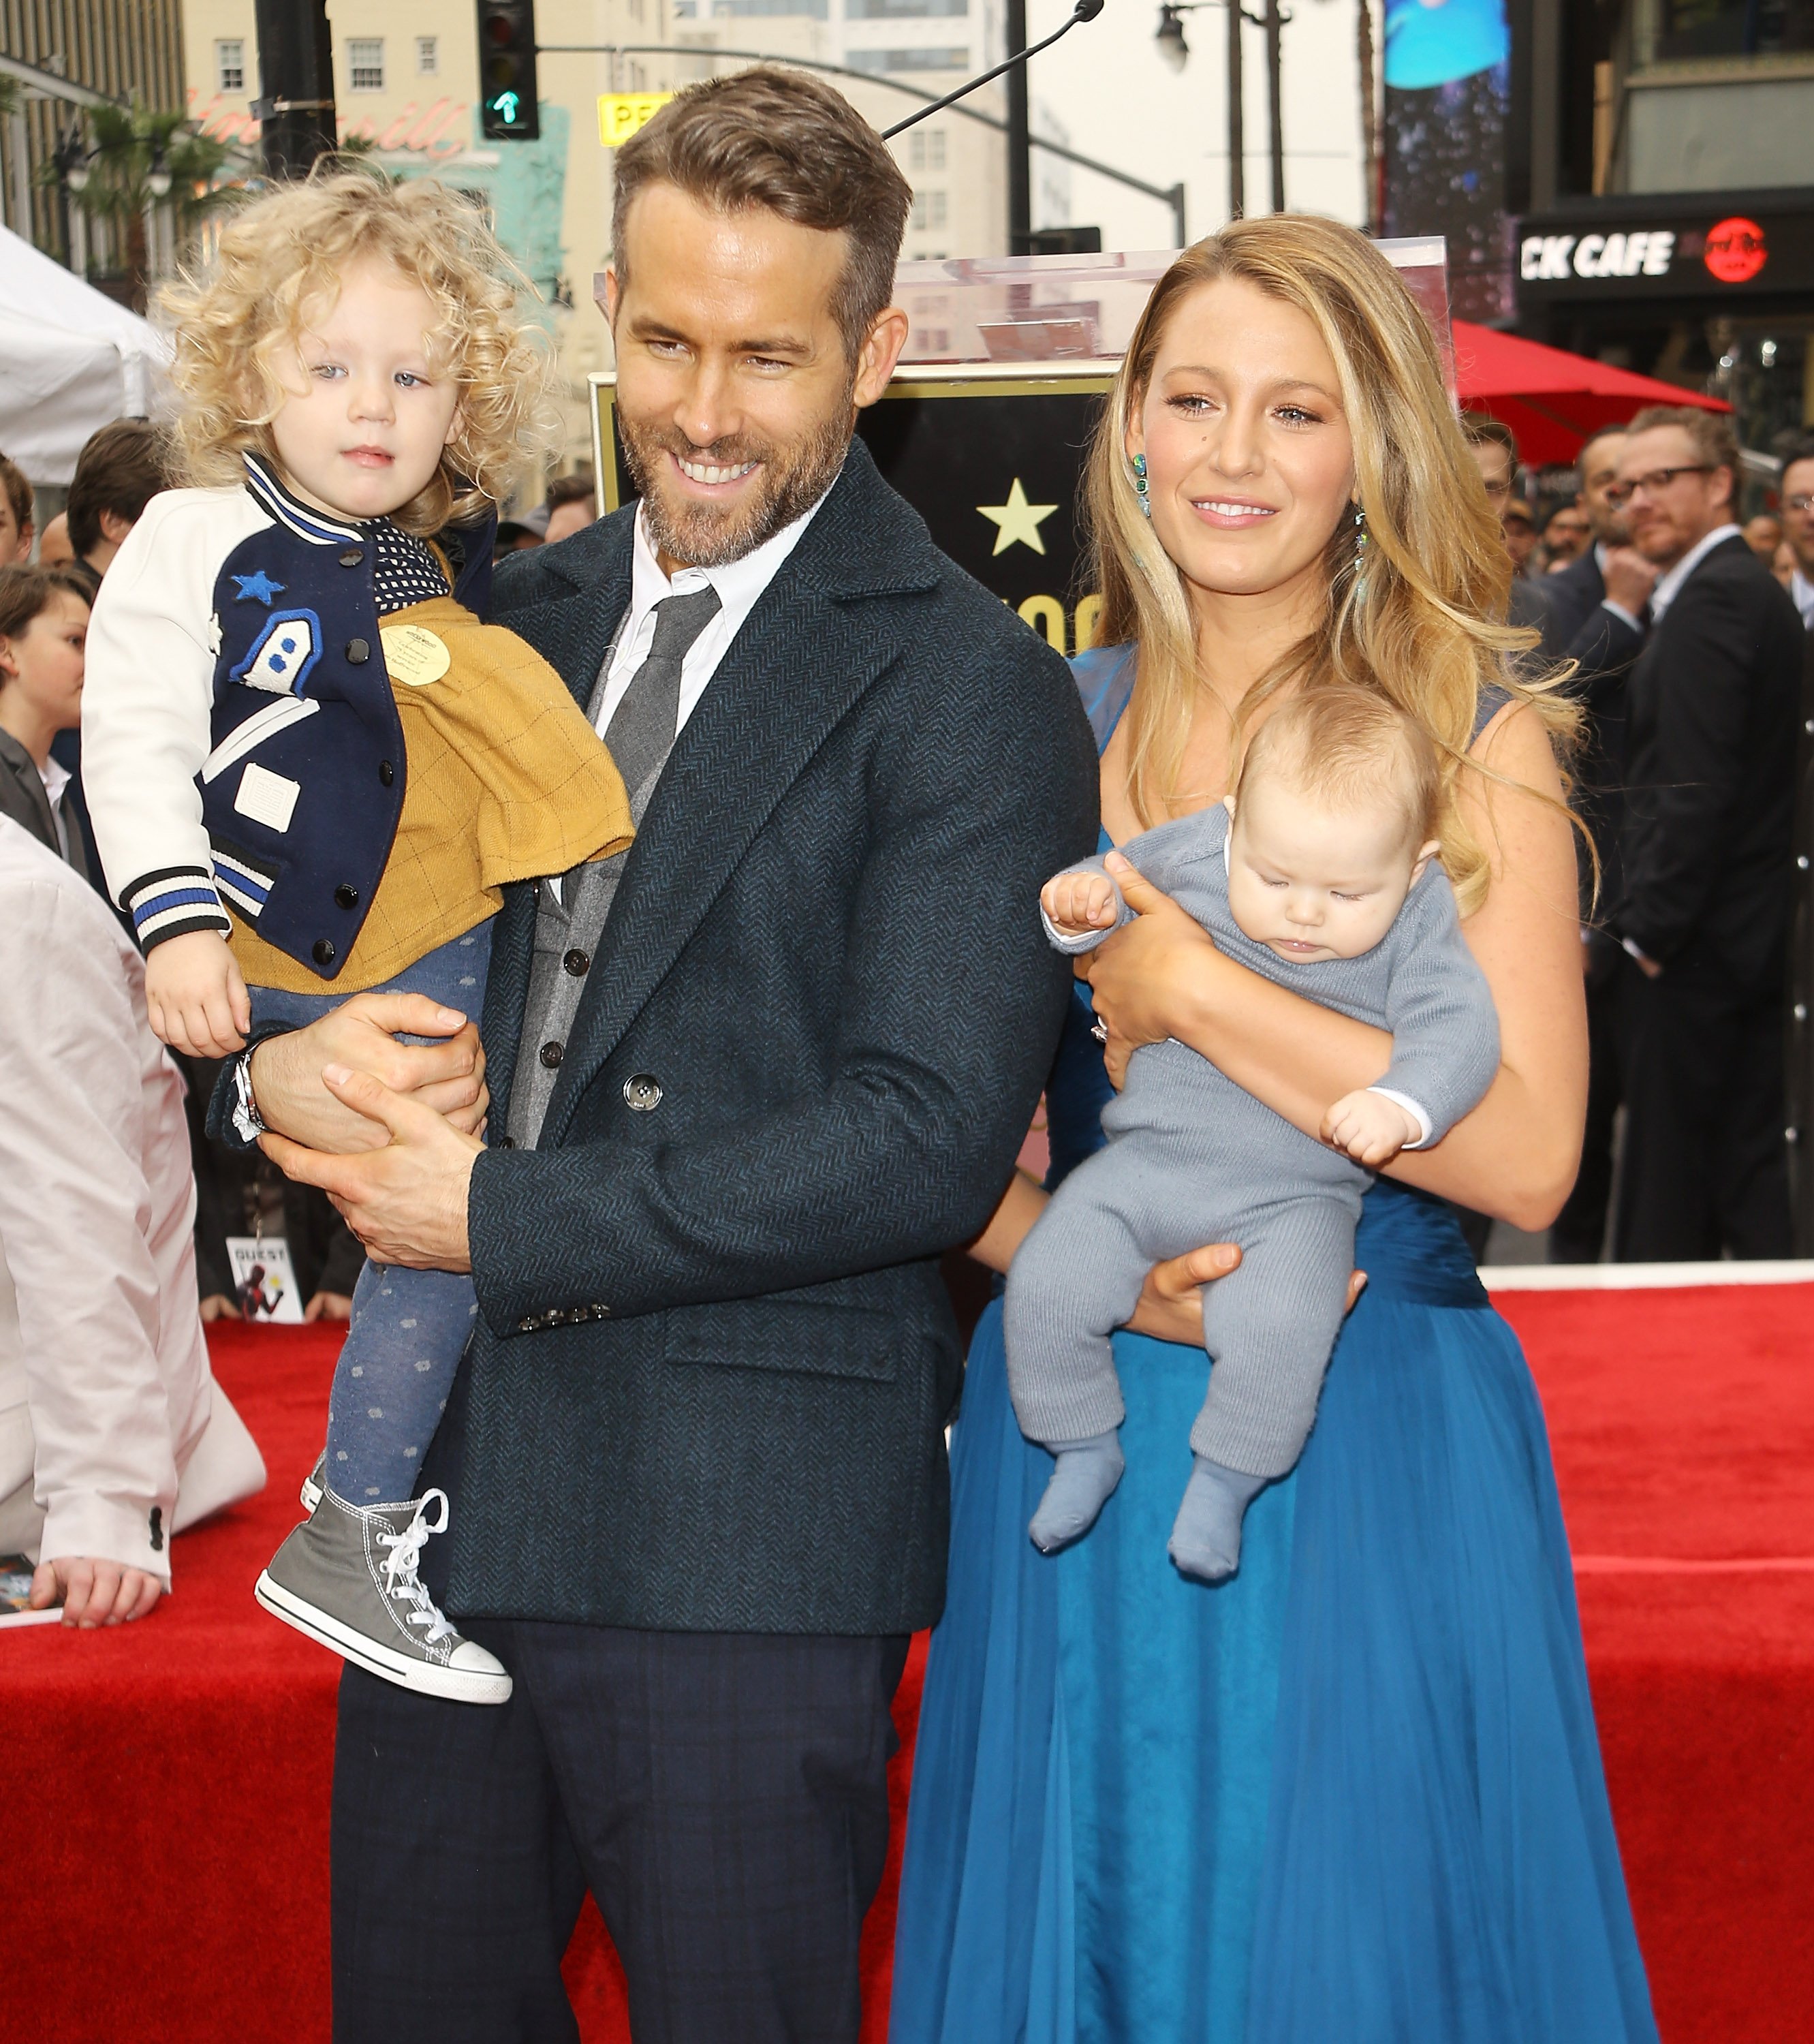 Blake Lively and daughter attend the ceremony that honored Ryan Reynolds with a star on the Hollywood Walk of Fame on December 15, 2016, in Hollywood, California. I Source: Getty Images